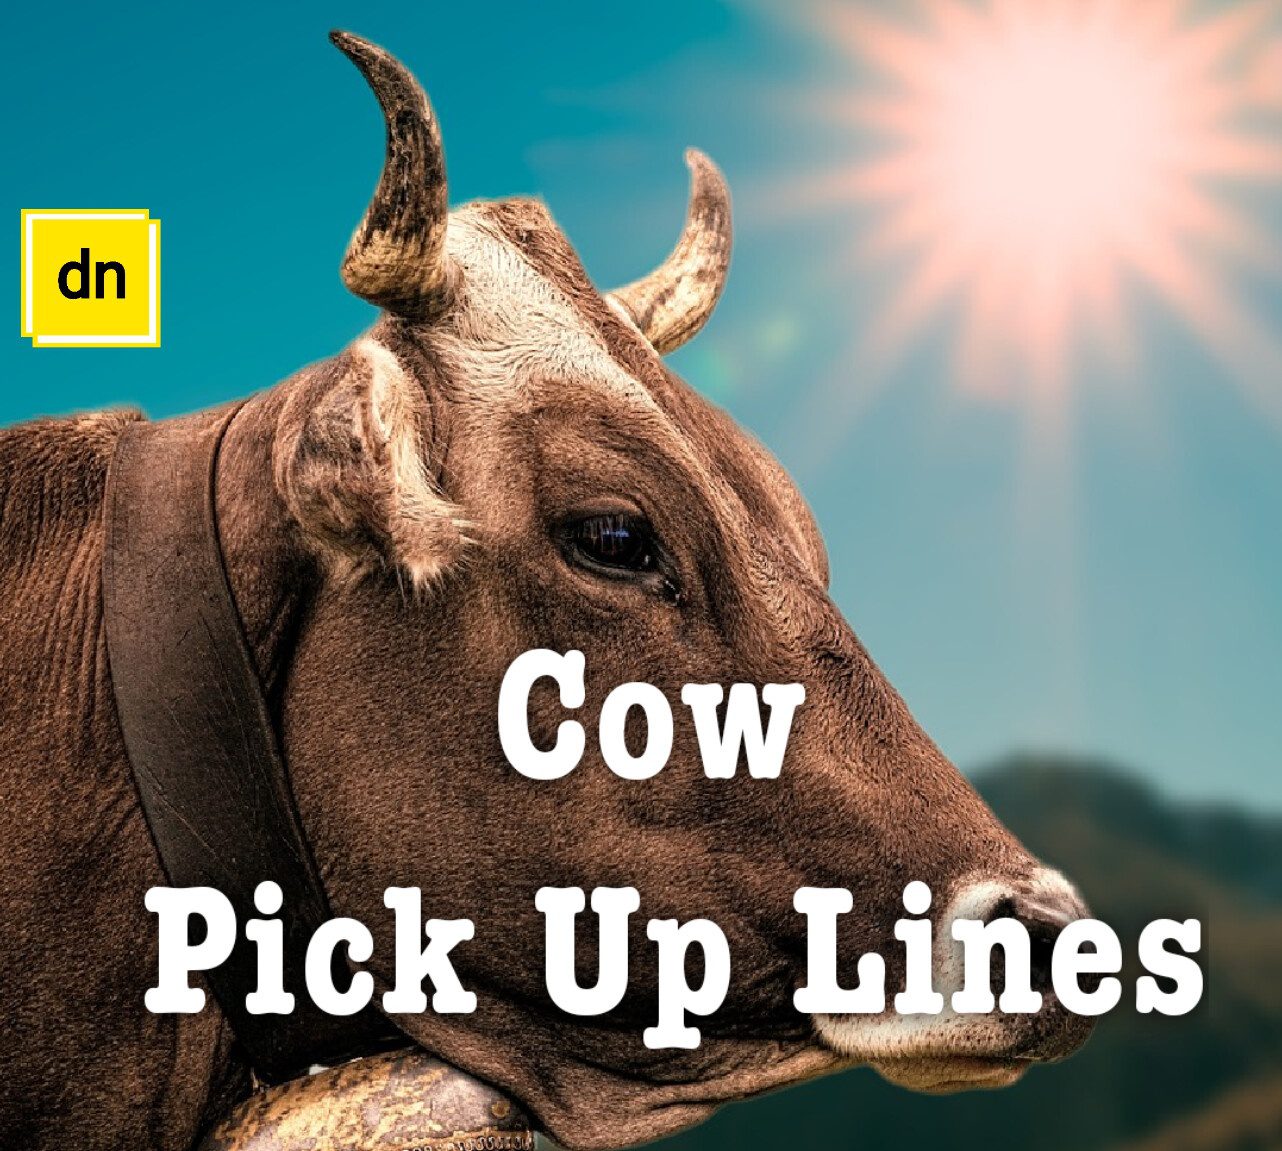 Cow pick up line